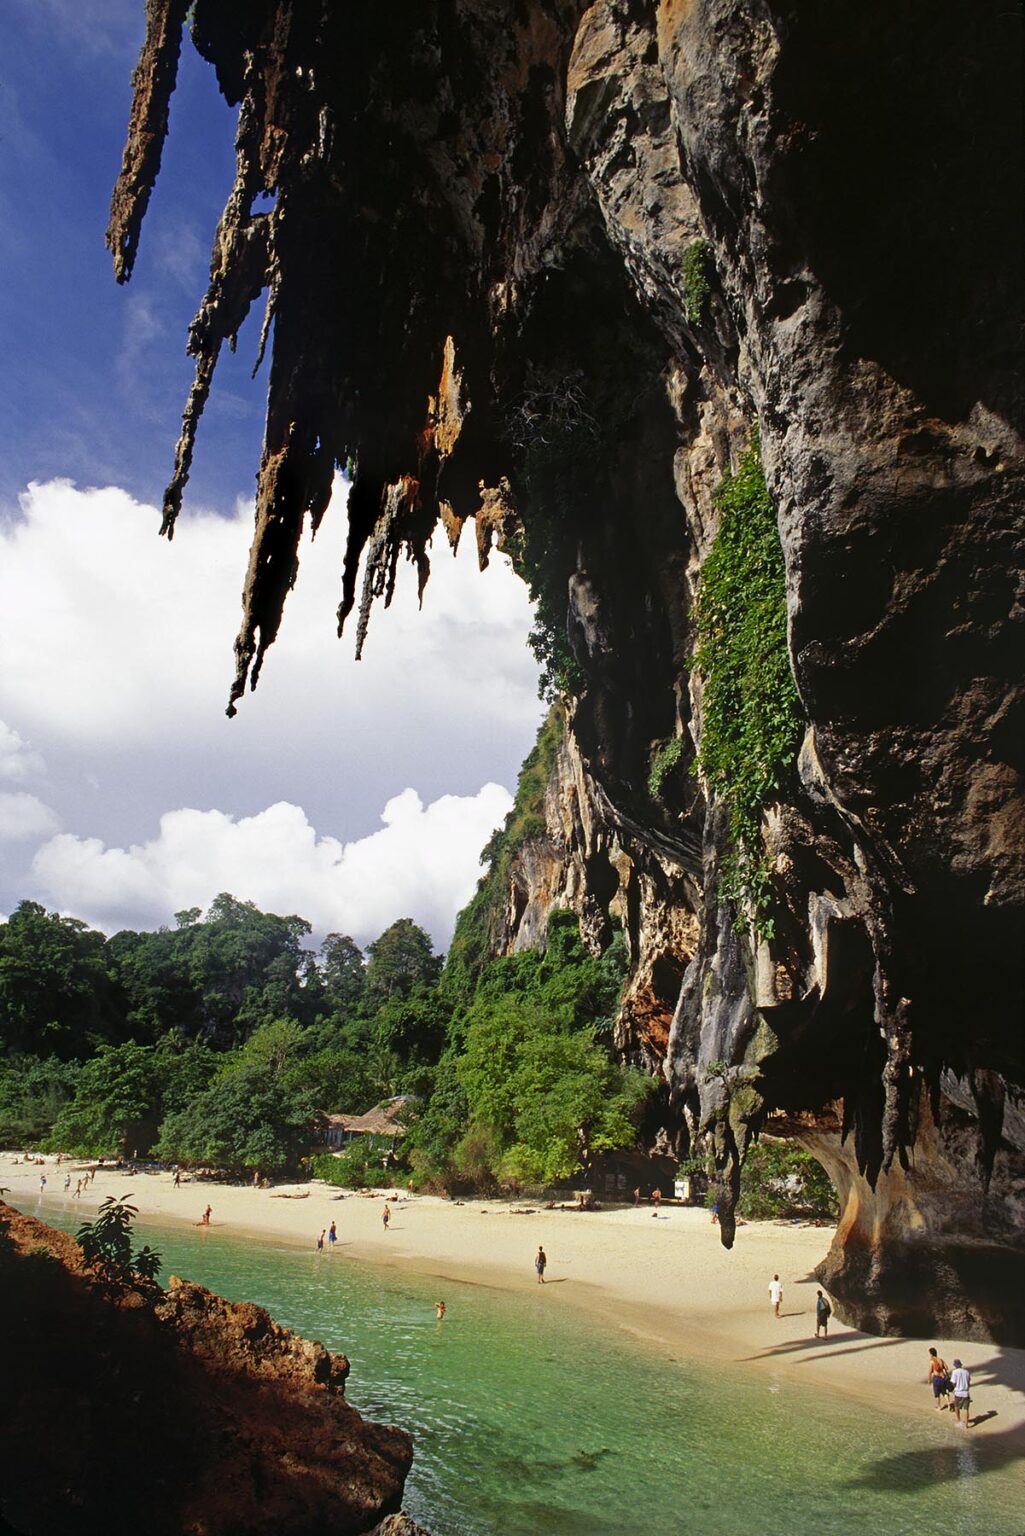 Clear tropical waters and LIMESTONE CLIFFS as seen from inside a CAVE in the beach resort of KRABI - THAILAND